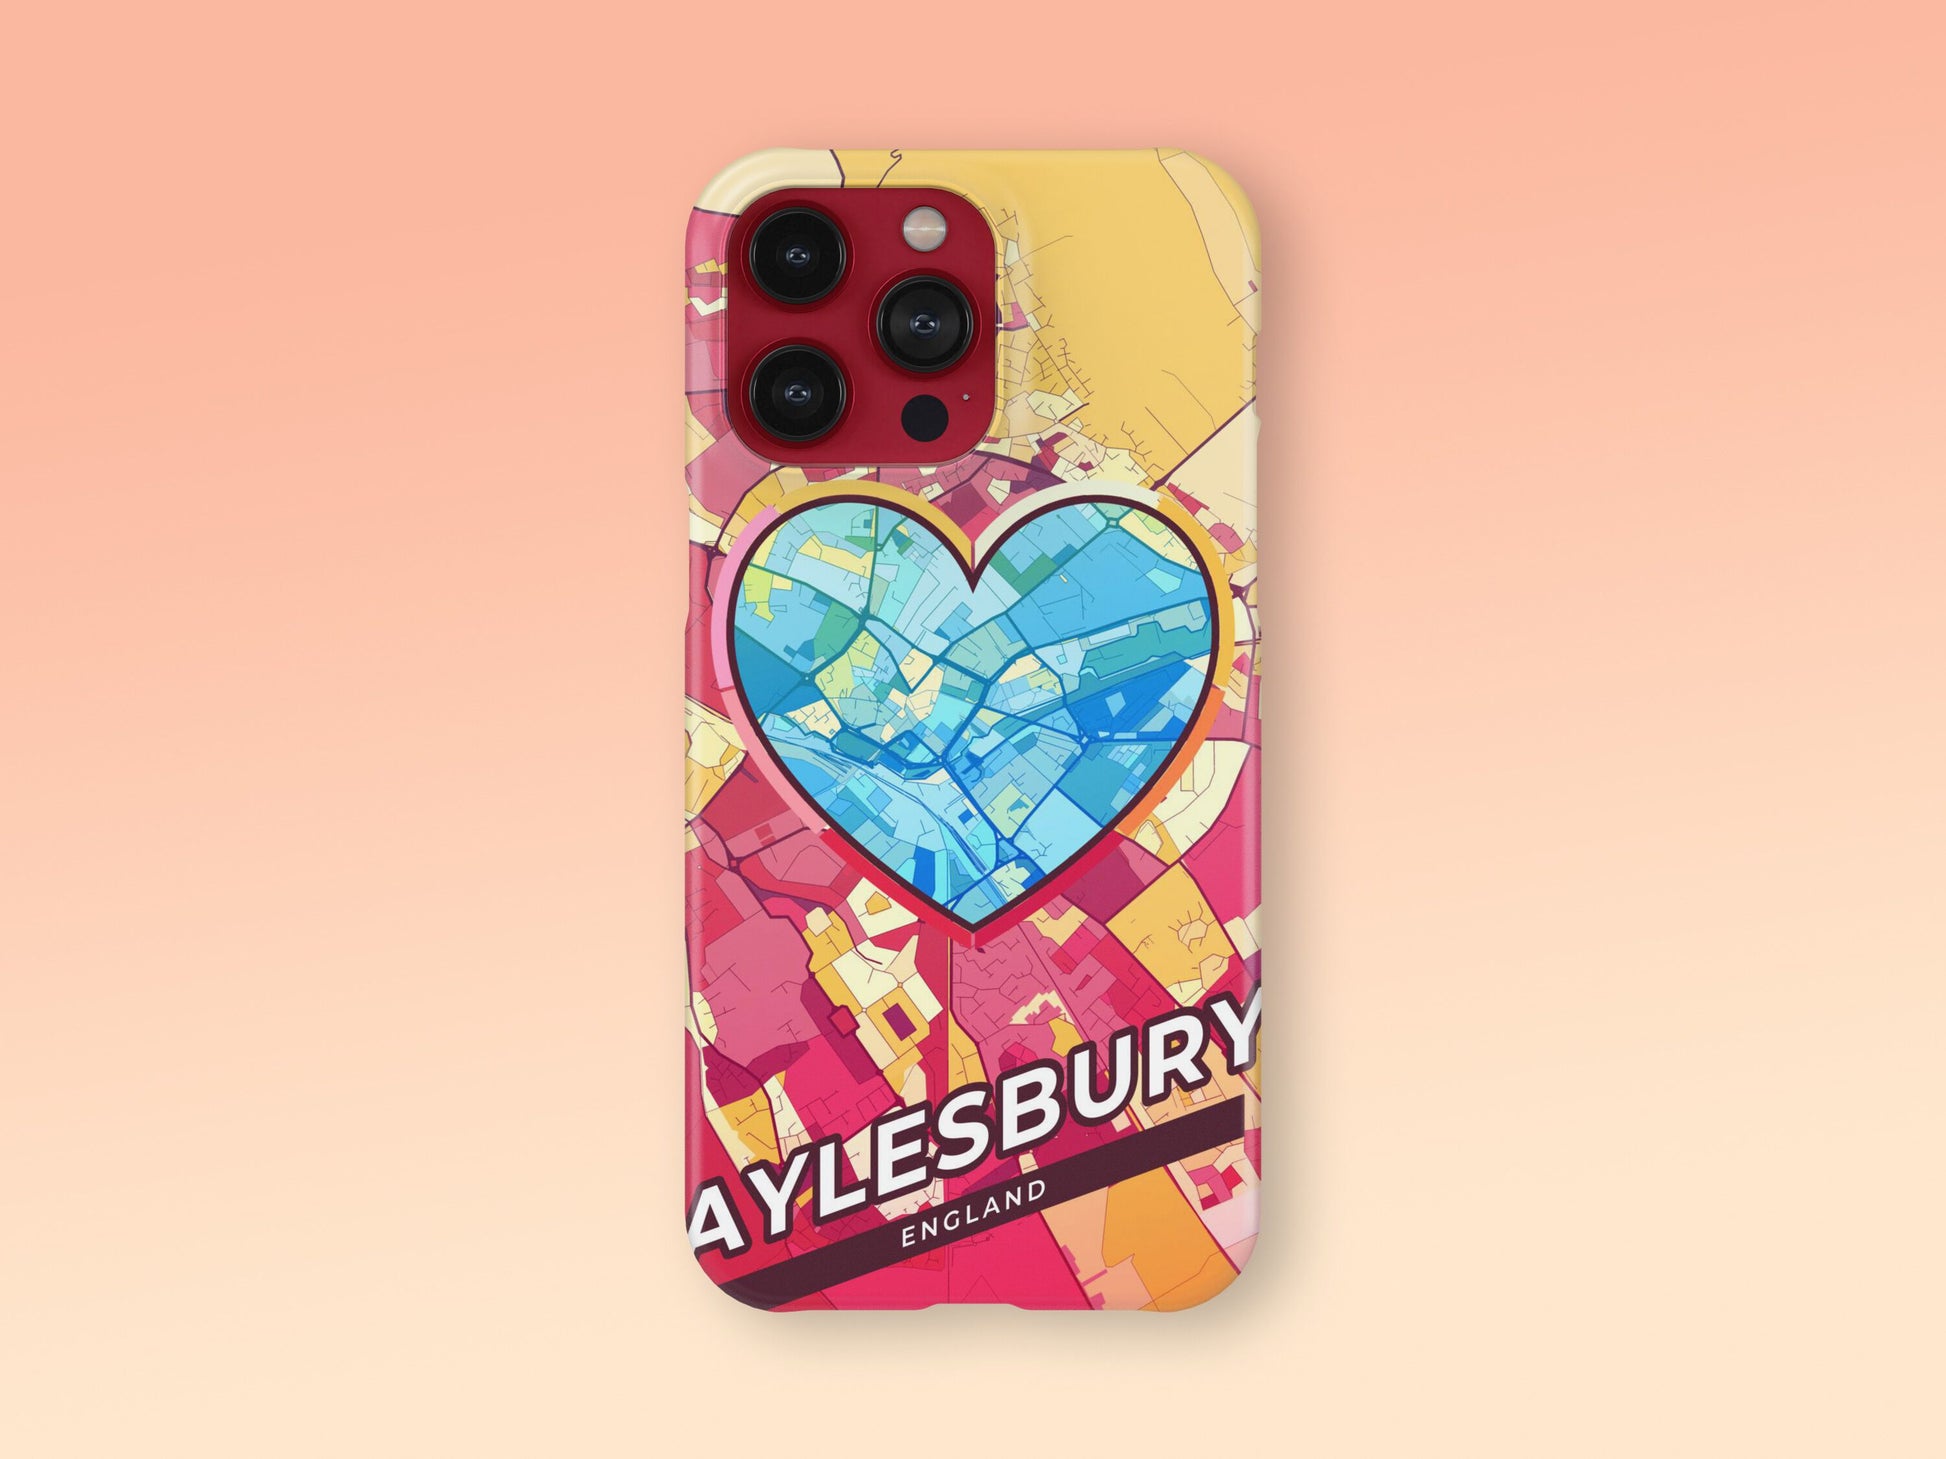 Aylesbury England slim phone case with colorful icon. Birthday, wedding or housewarming gift. Couple match cases. 2